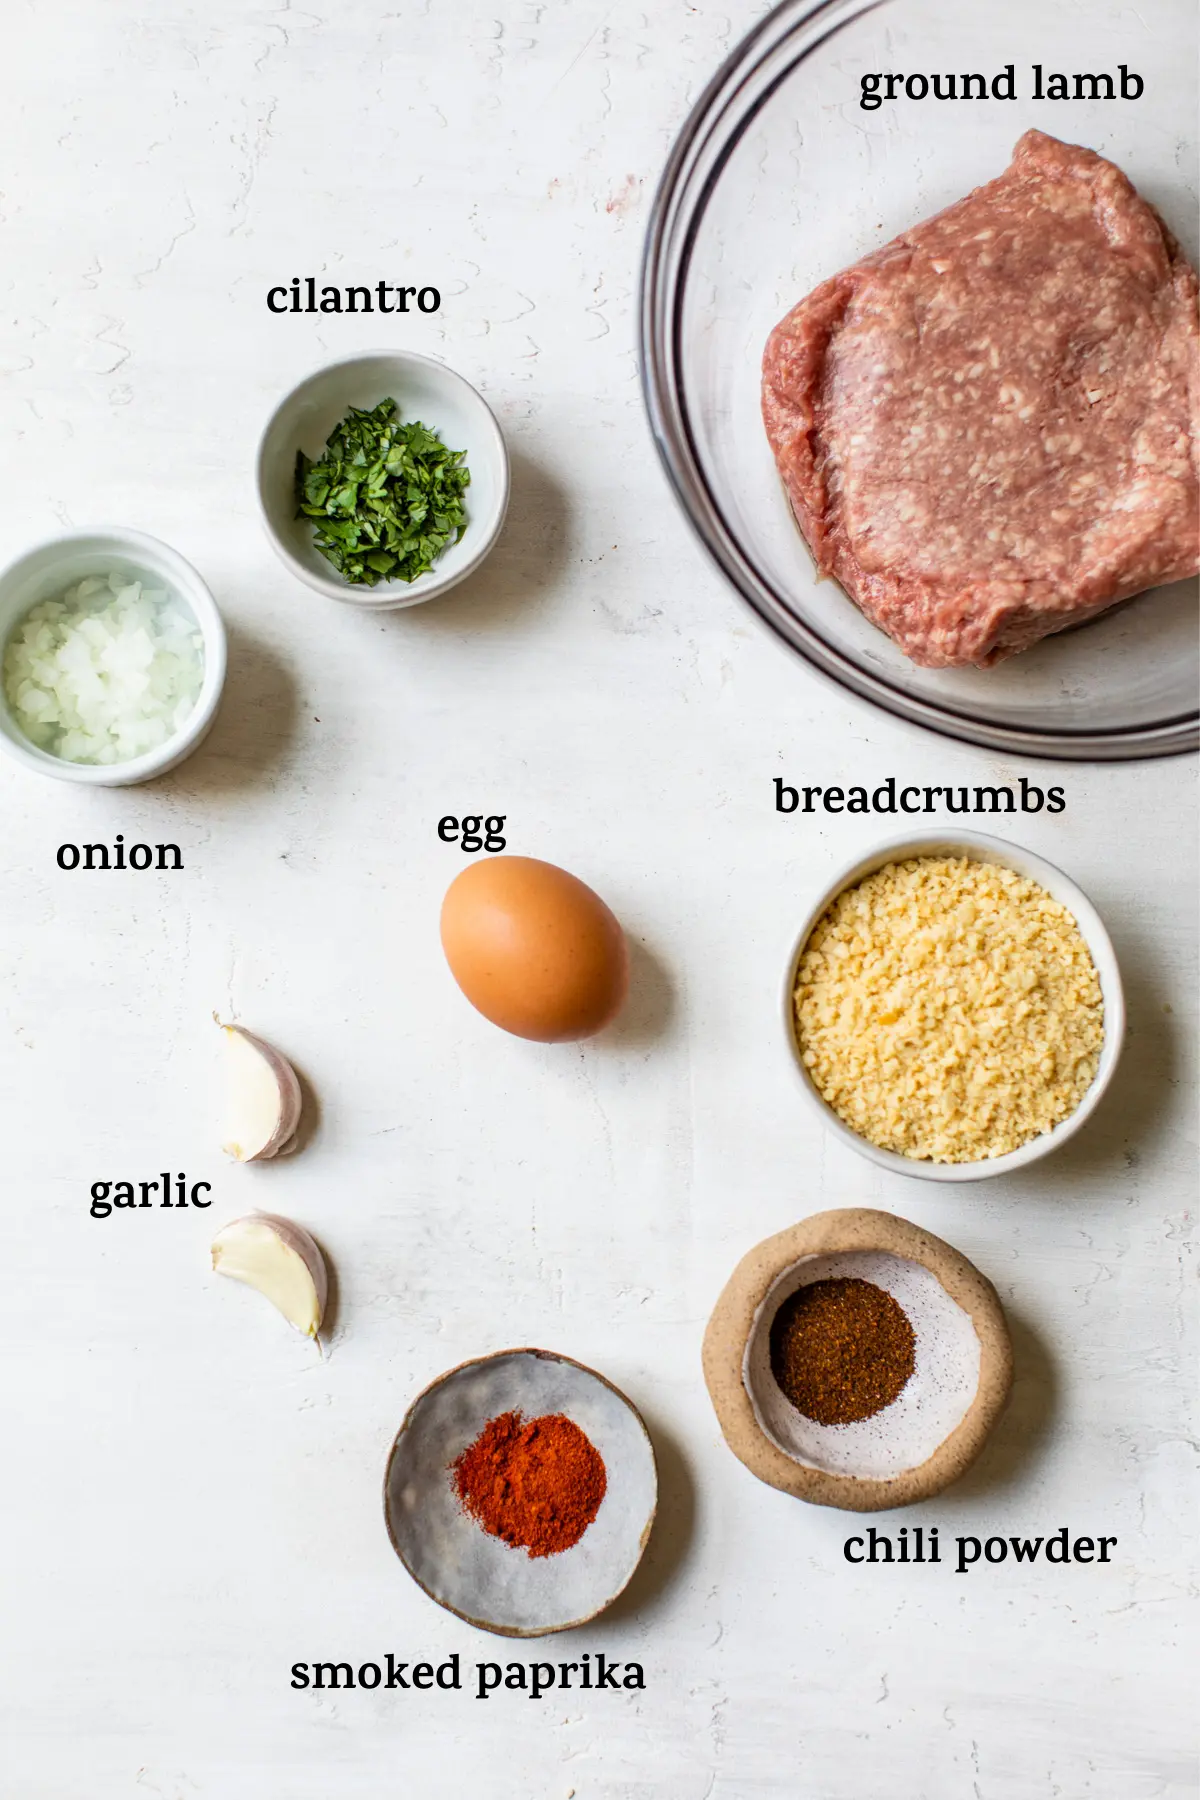 meatball ingredients with text overlay